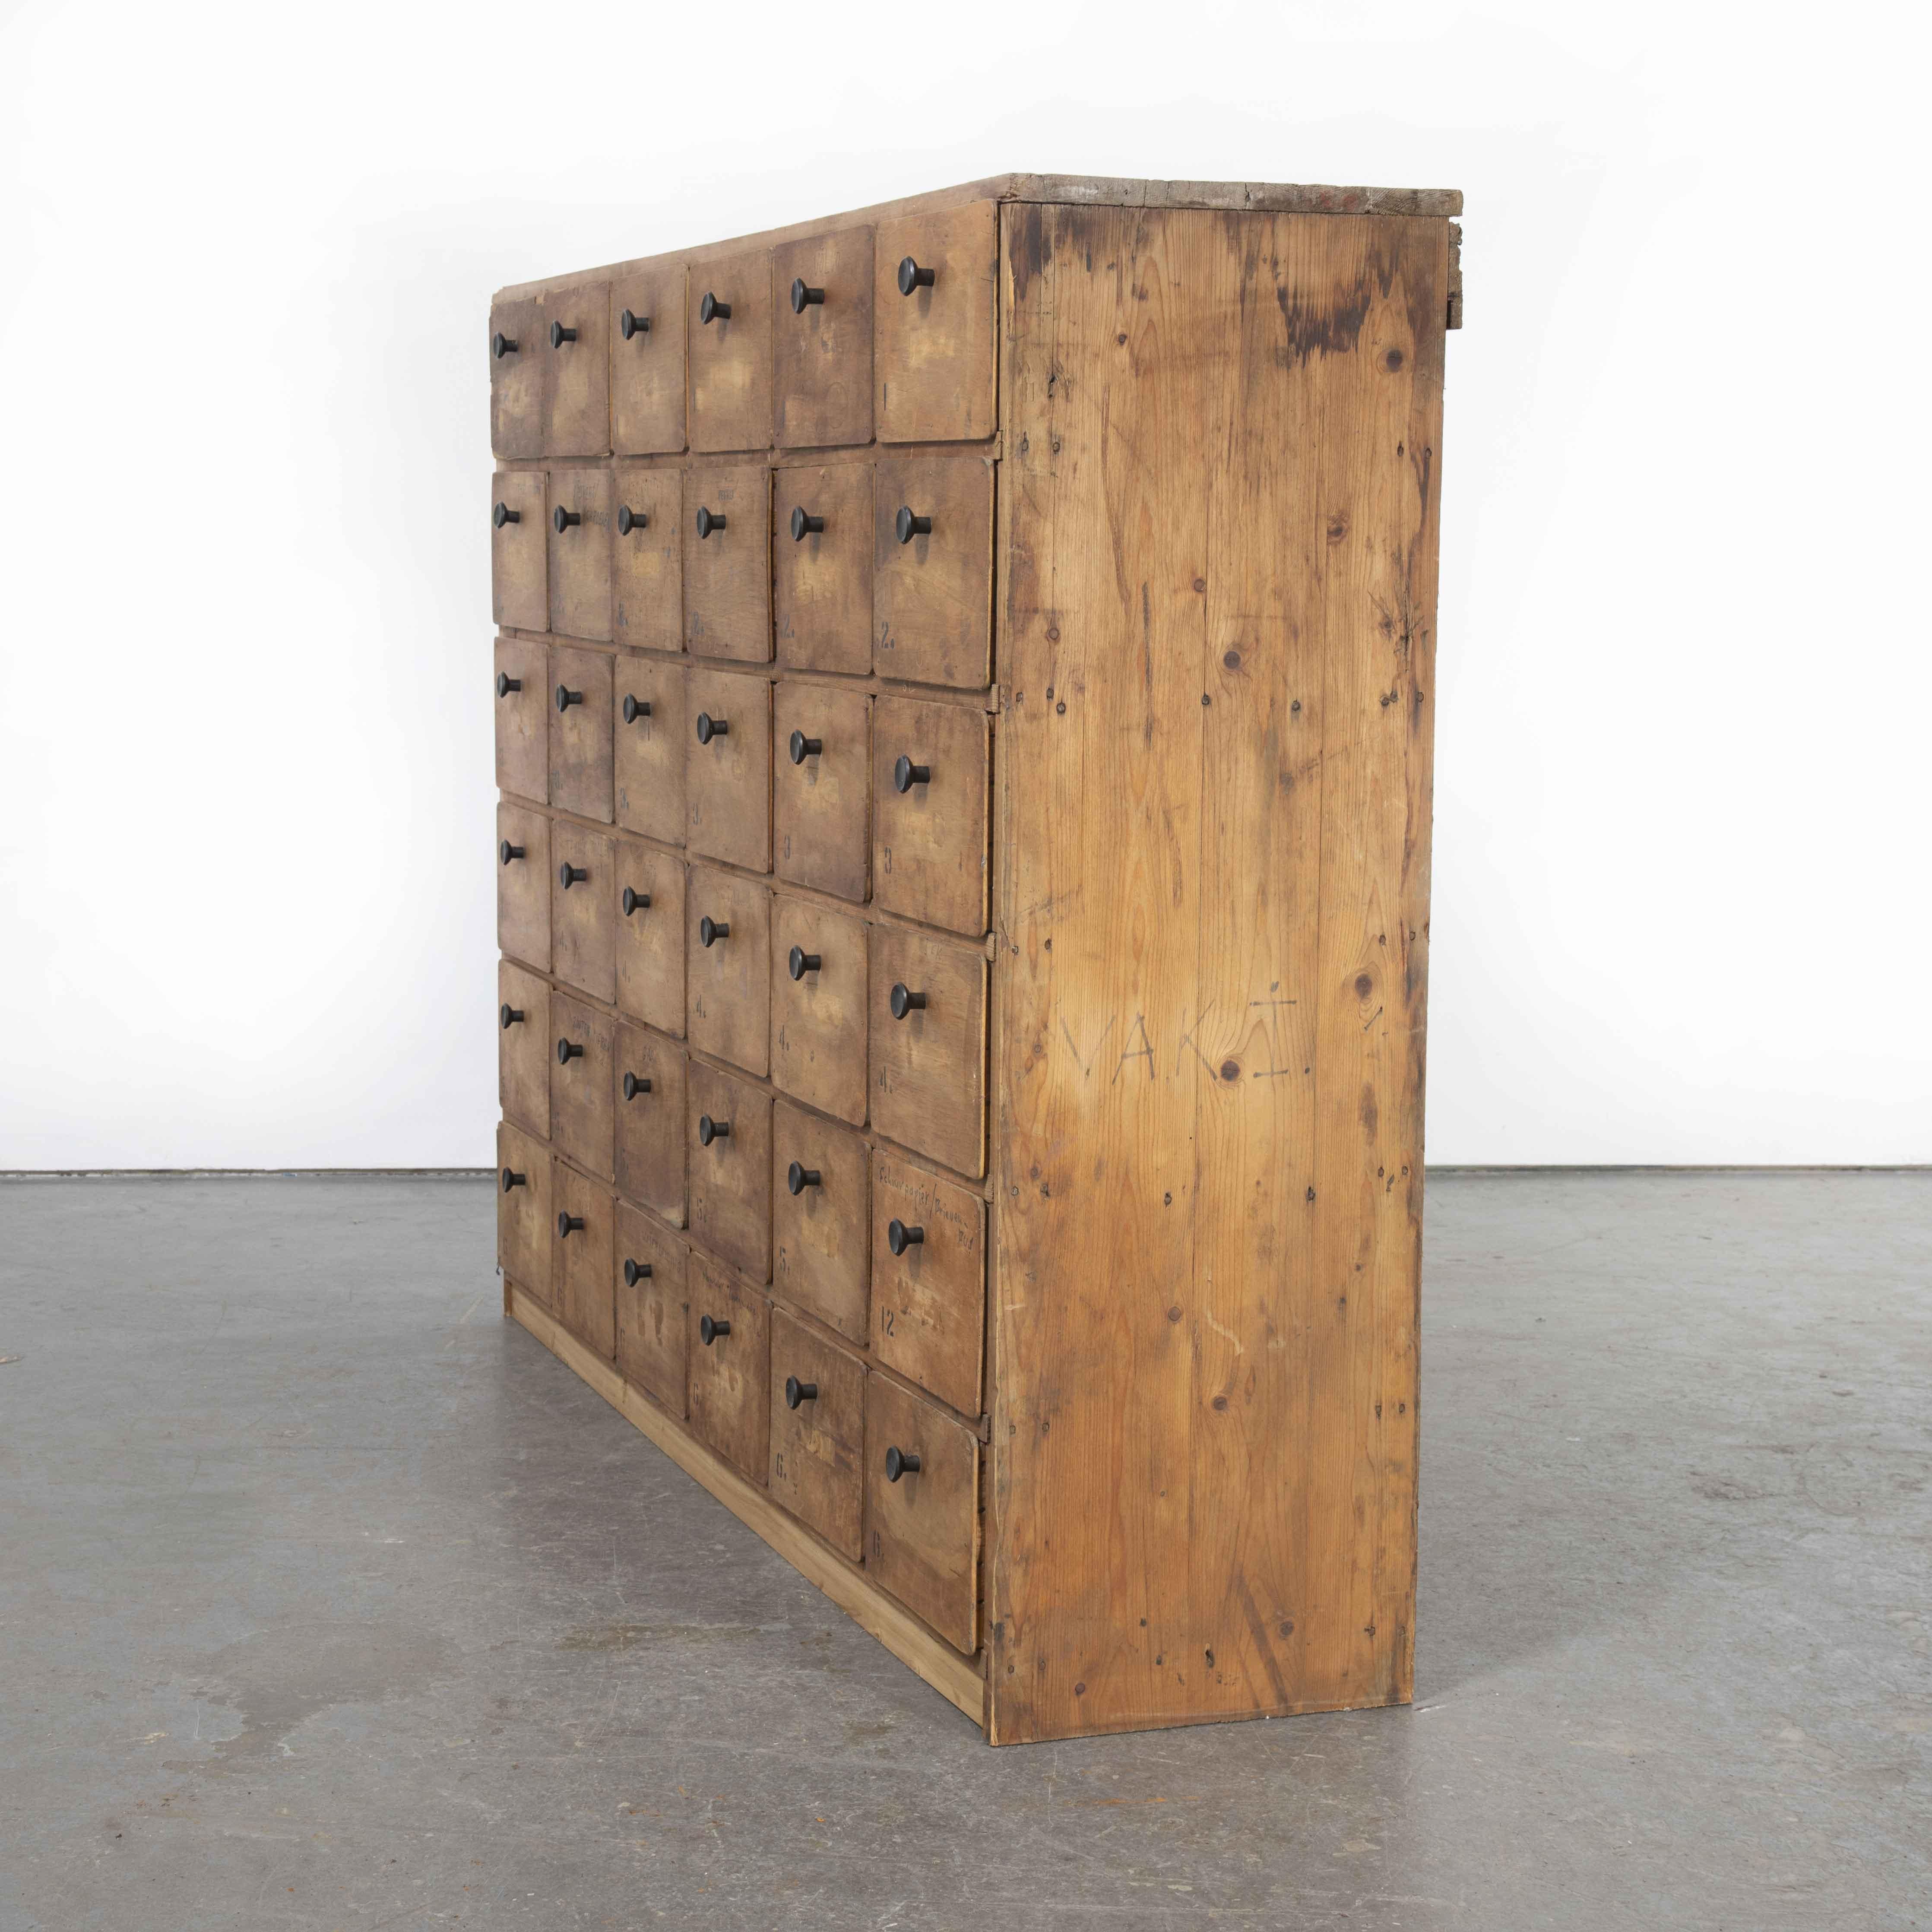 1950’s Belgian workshop bank of drawers – thirty six drawers (Model 1211)

1950’s Belgian workshop bank of drawers – thirty six drawers. We love this rough and ready bank of workshop drawers from Belgium. Probably handmade by the workshop owner,